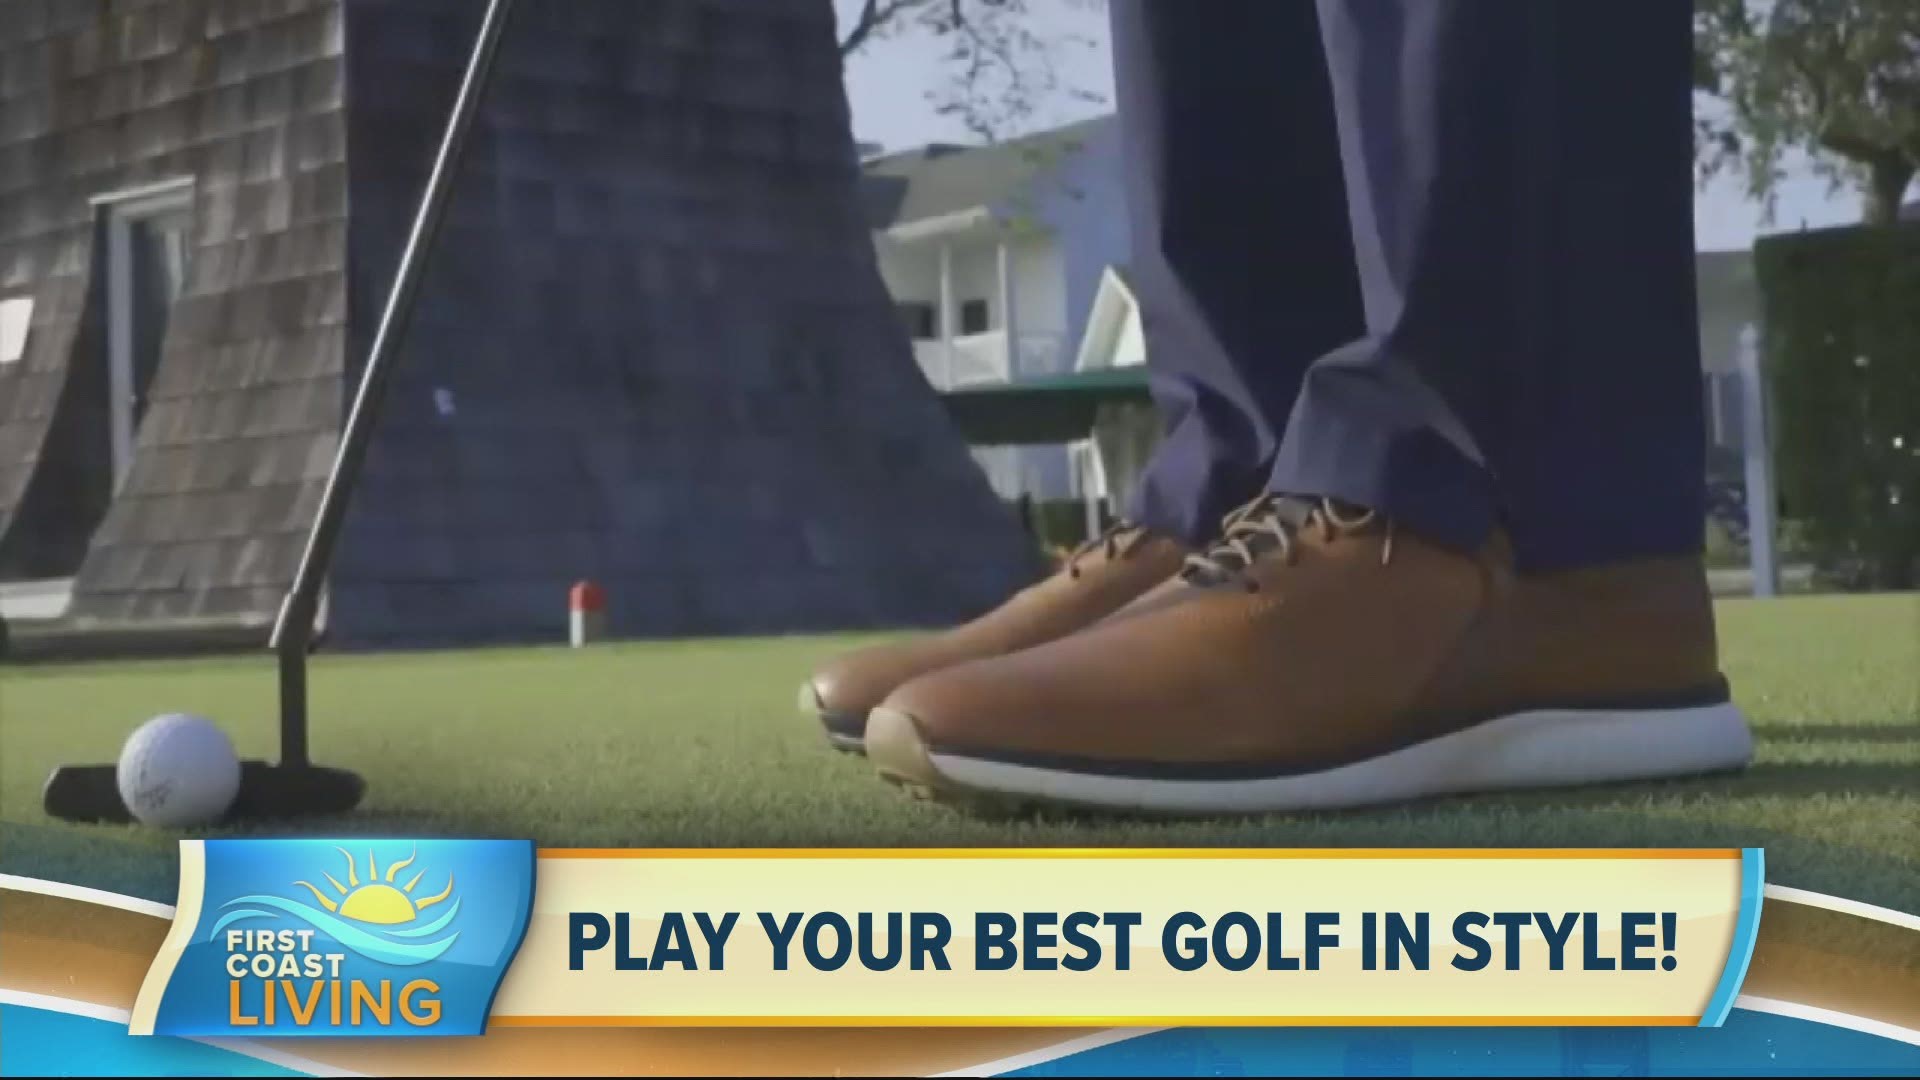 Here’s How to Look Stylish while playing your best game on and the Fairway.